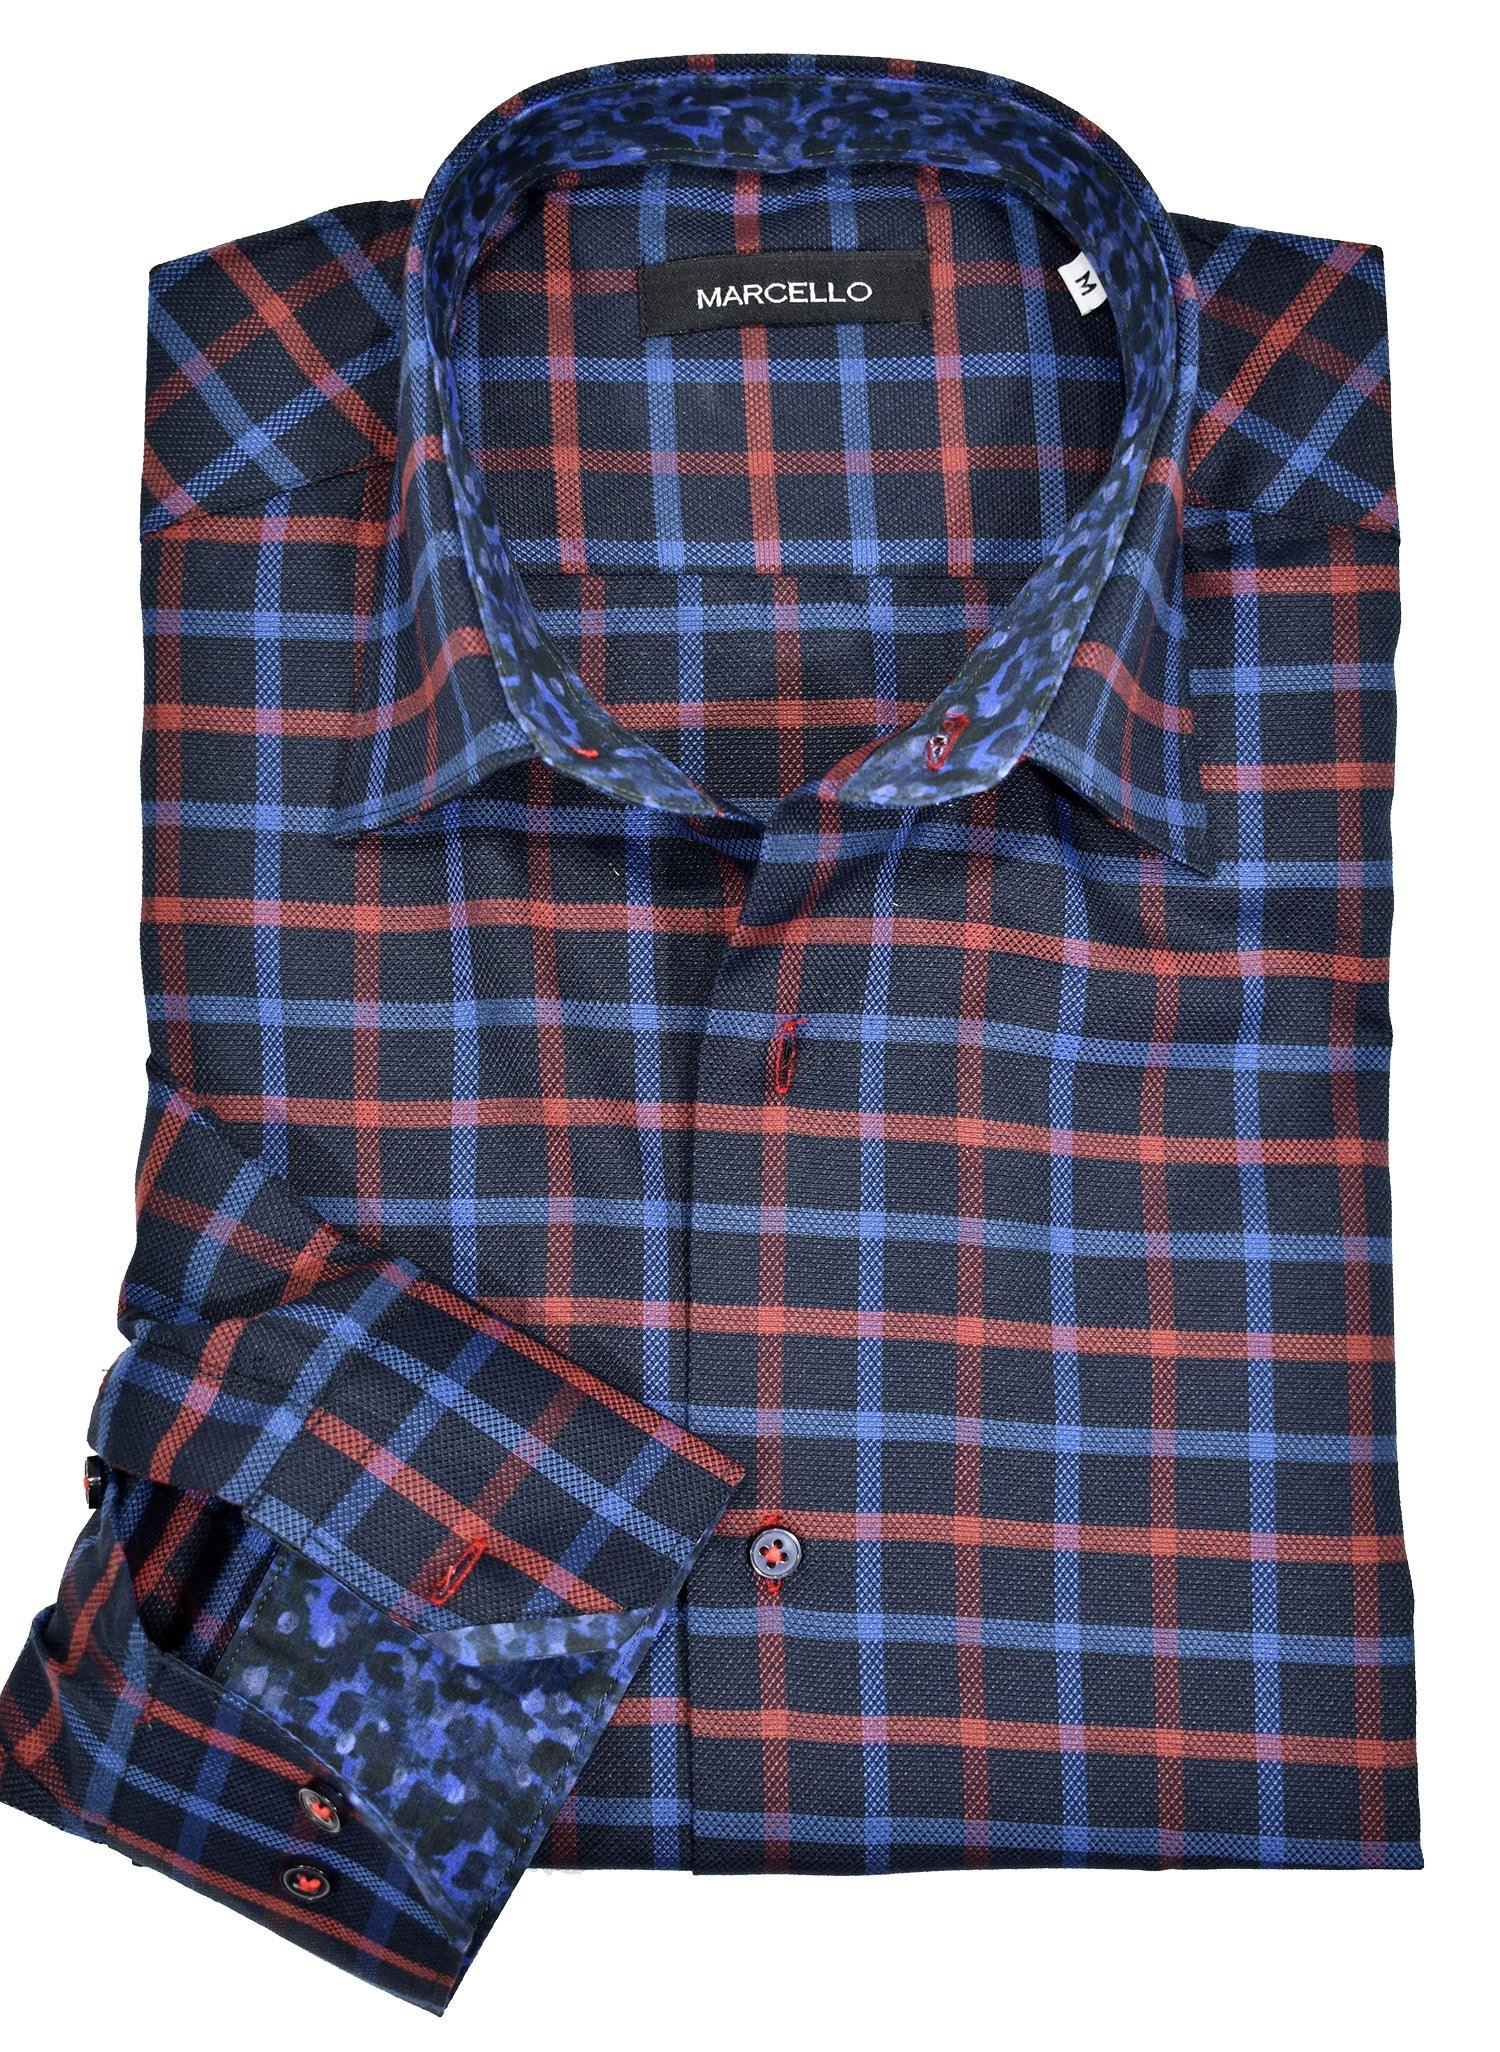 Clean dark ground with rich Fall color plaid.    Soft cotton blend fabric. Clean Fall colors over a black ground. Fashion trim fabric. Classic shaped fit.